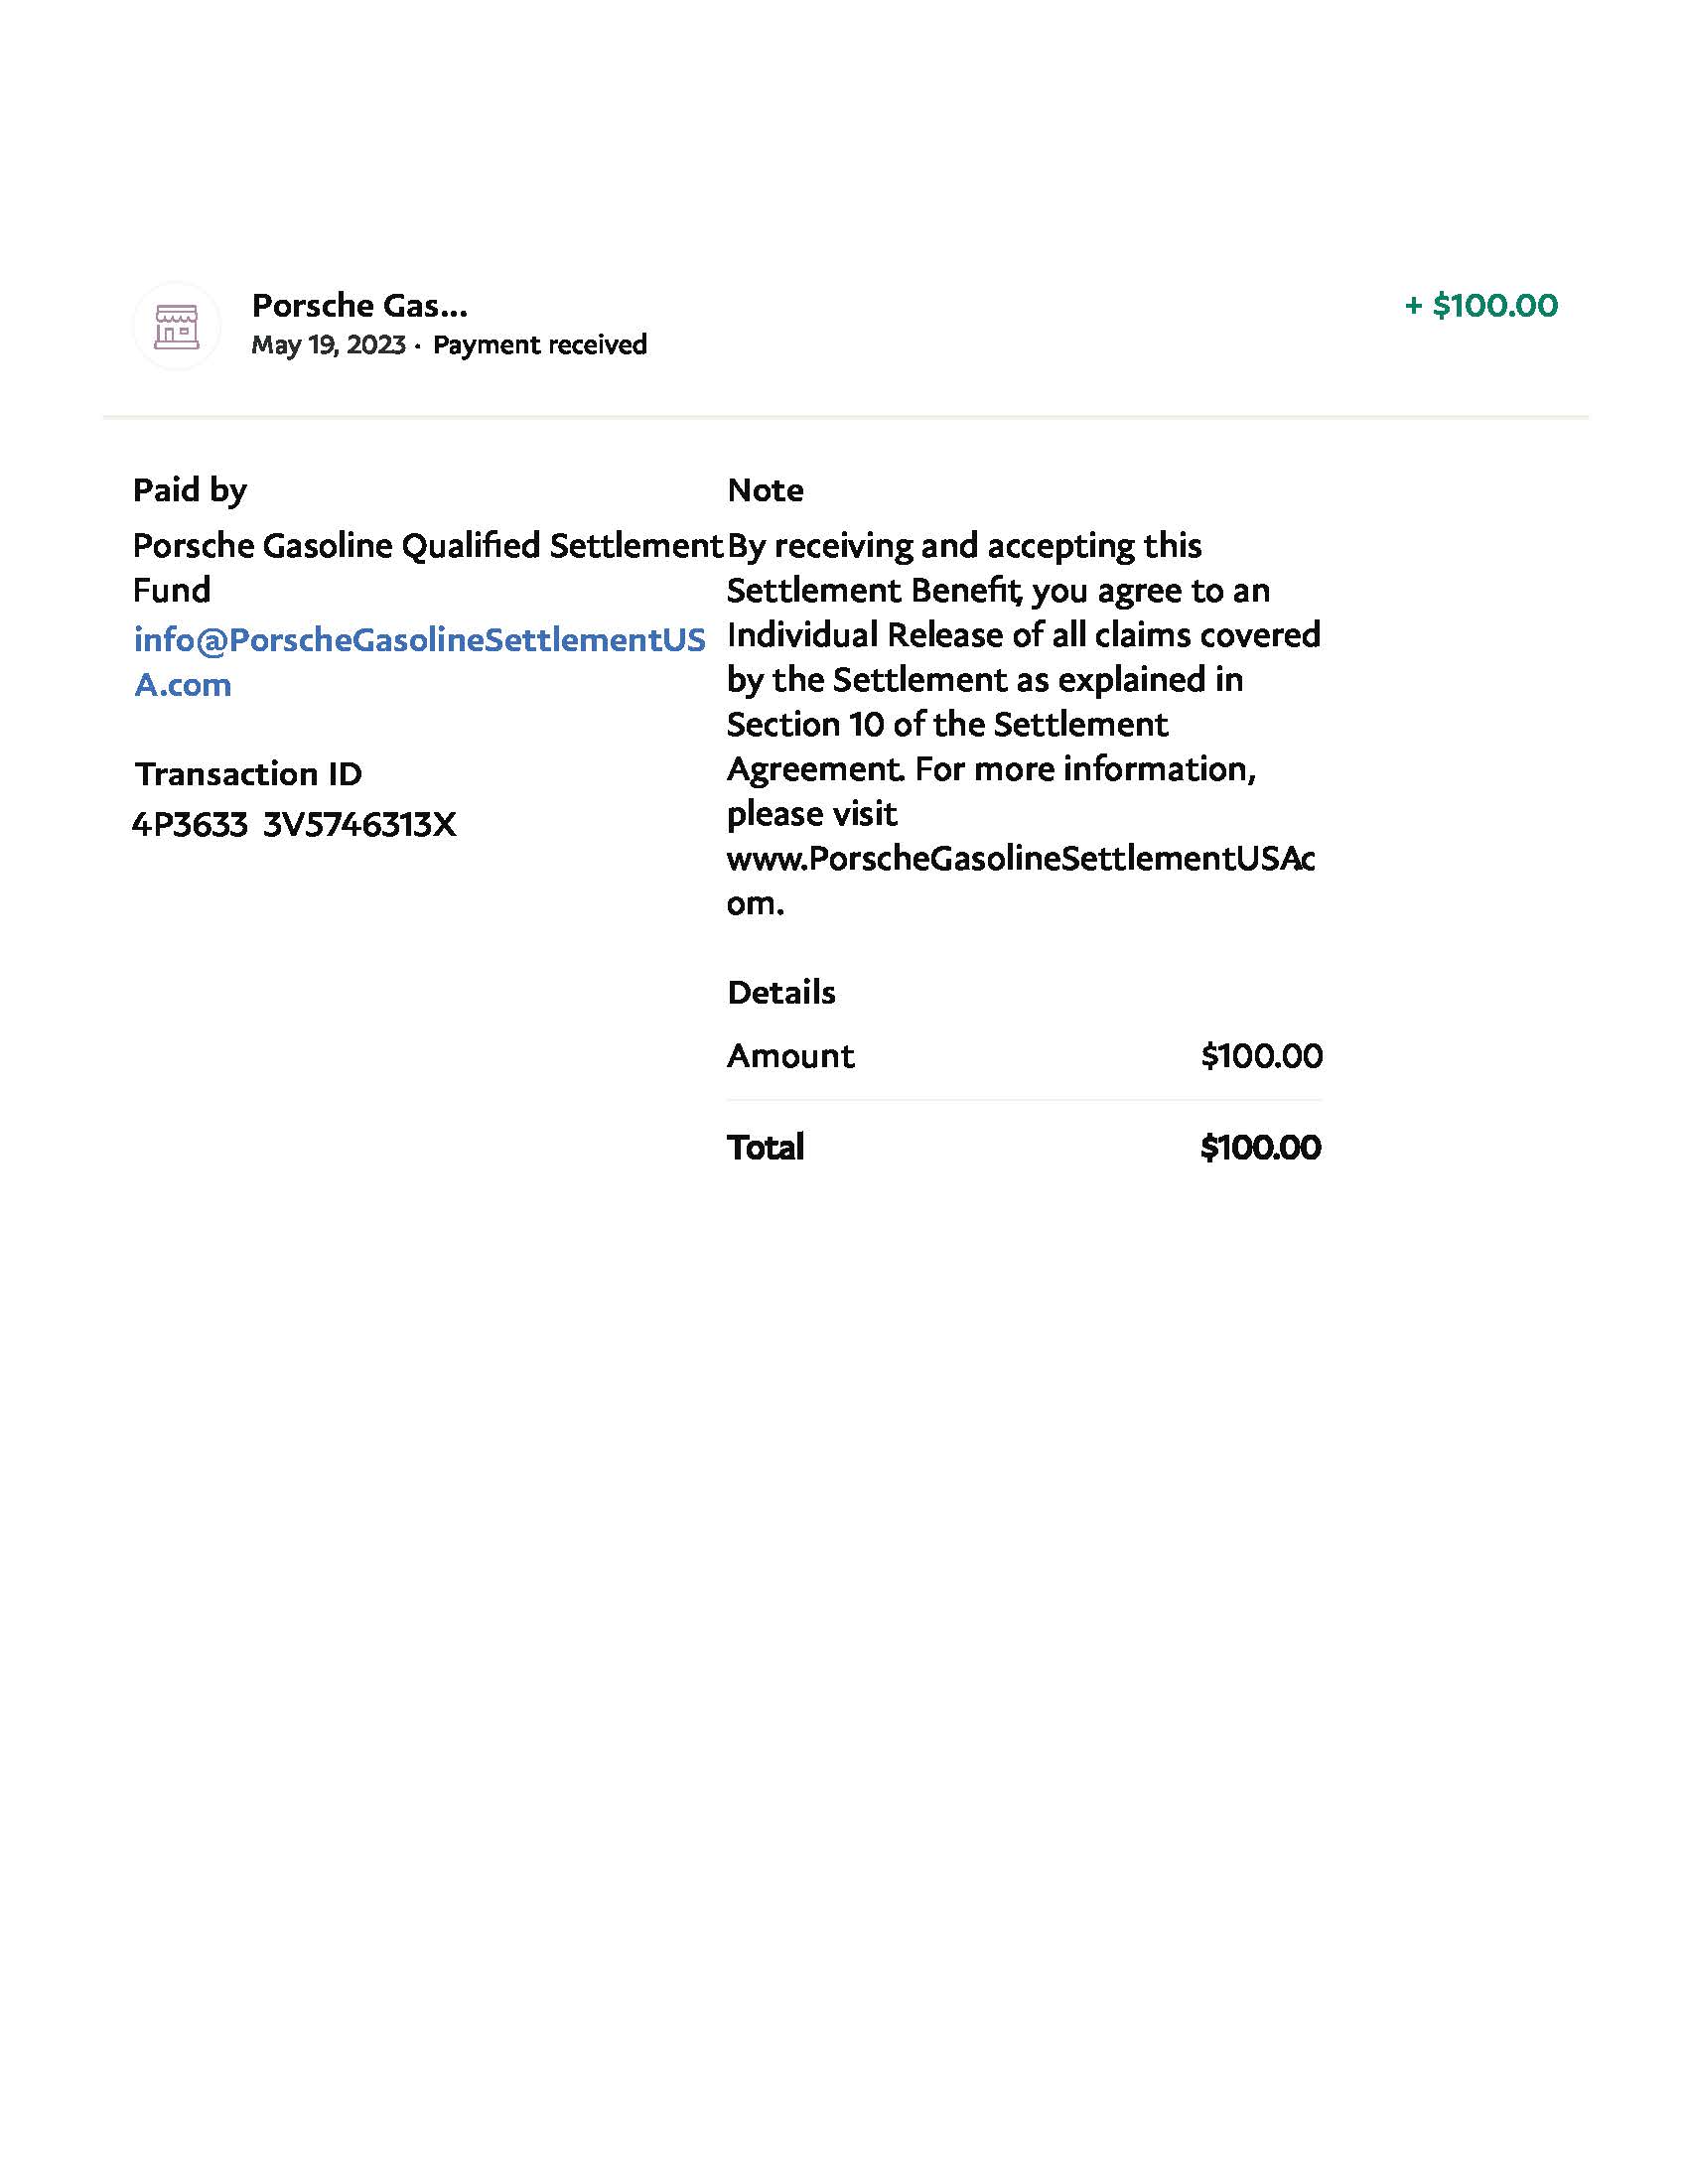 PayPal_ Transaction Details for gas claim, 2023-5-19.jpg